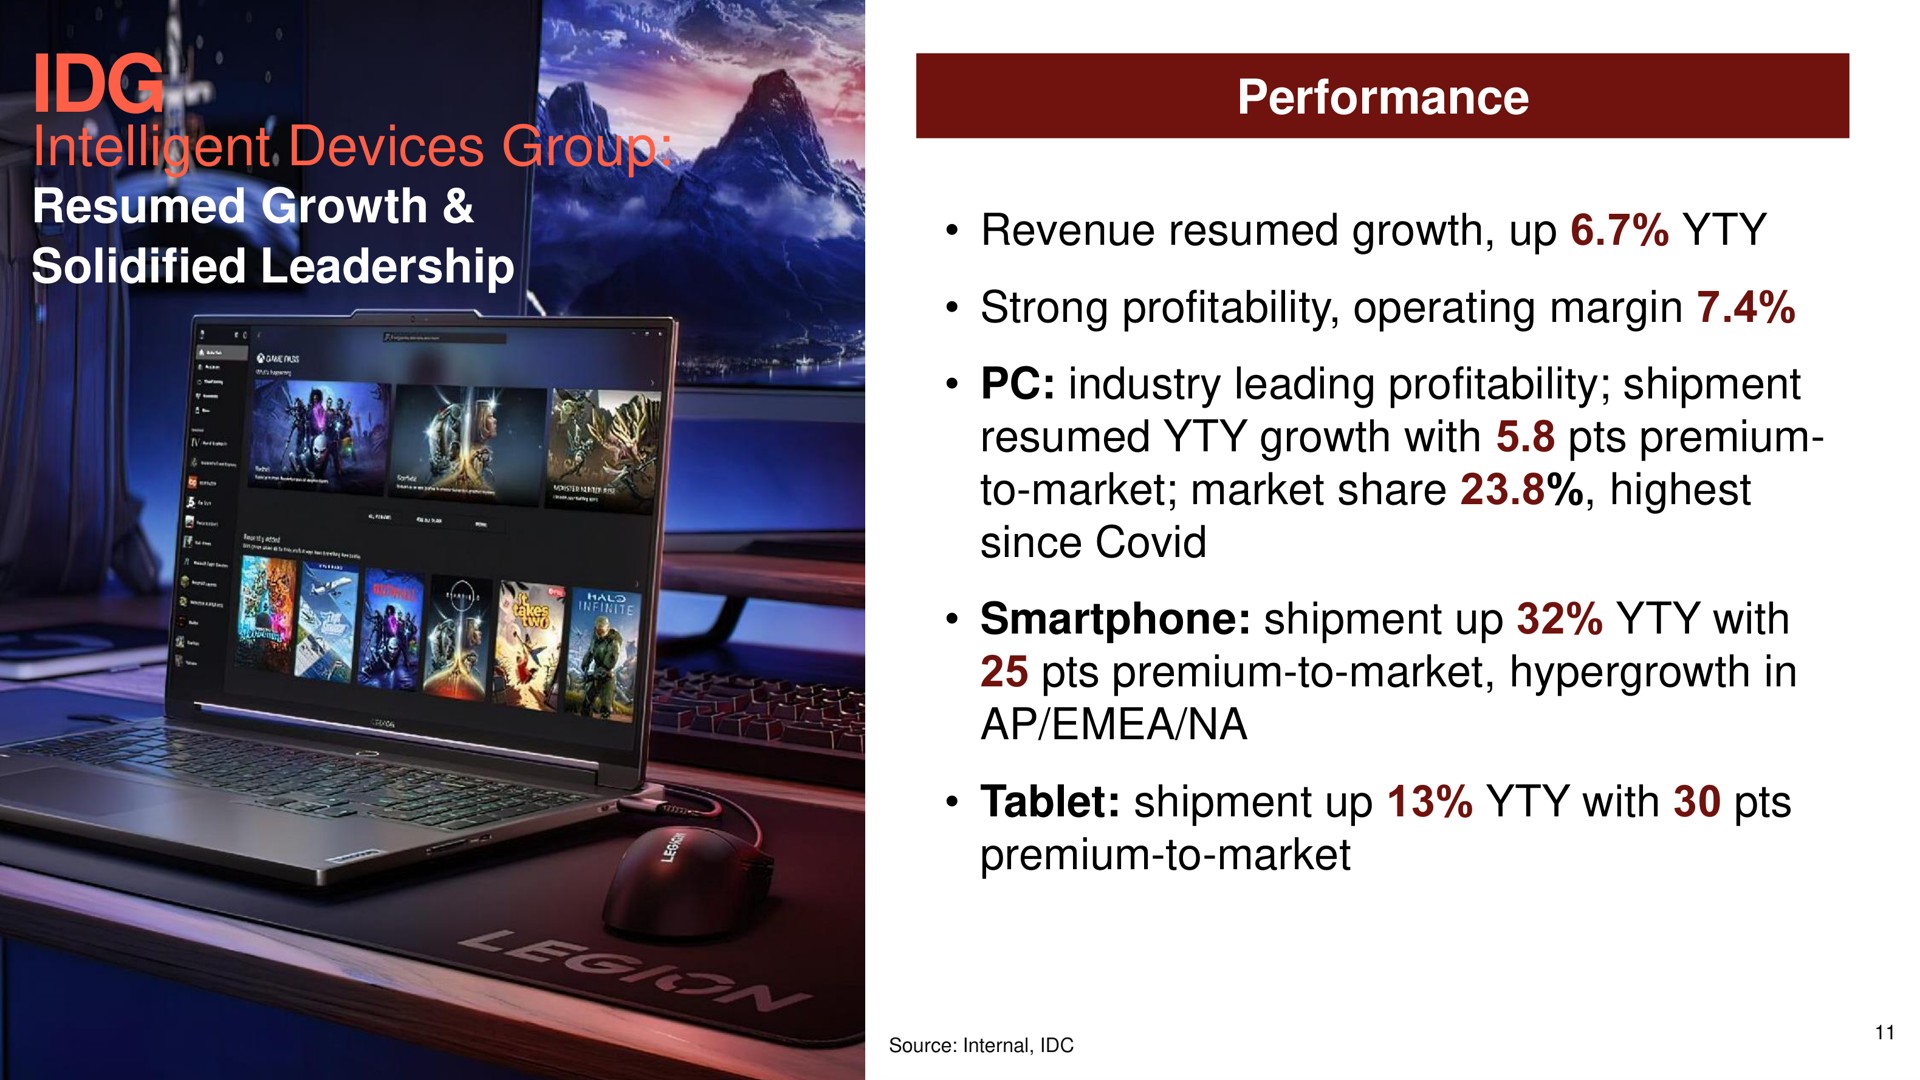 intelligent devices group resumed growth solidified leadership performance strong profitability operating margin with premium to market market share highest since covid shipment up with tablet shipment up with | Lenovo